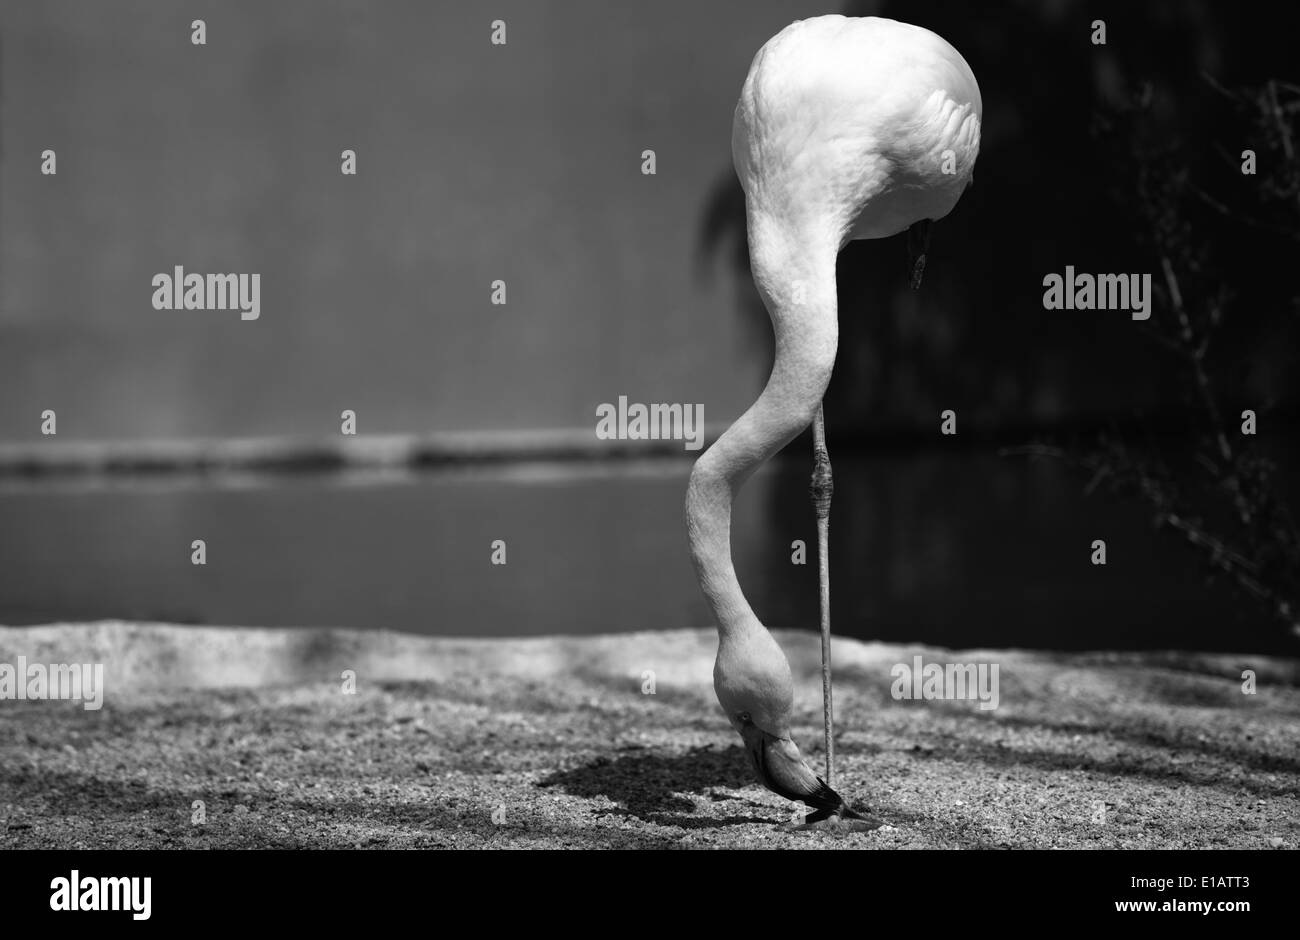 Flamingo in the park standing over one leg, Spain. Black and white shot Stock Photo